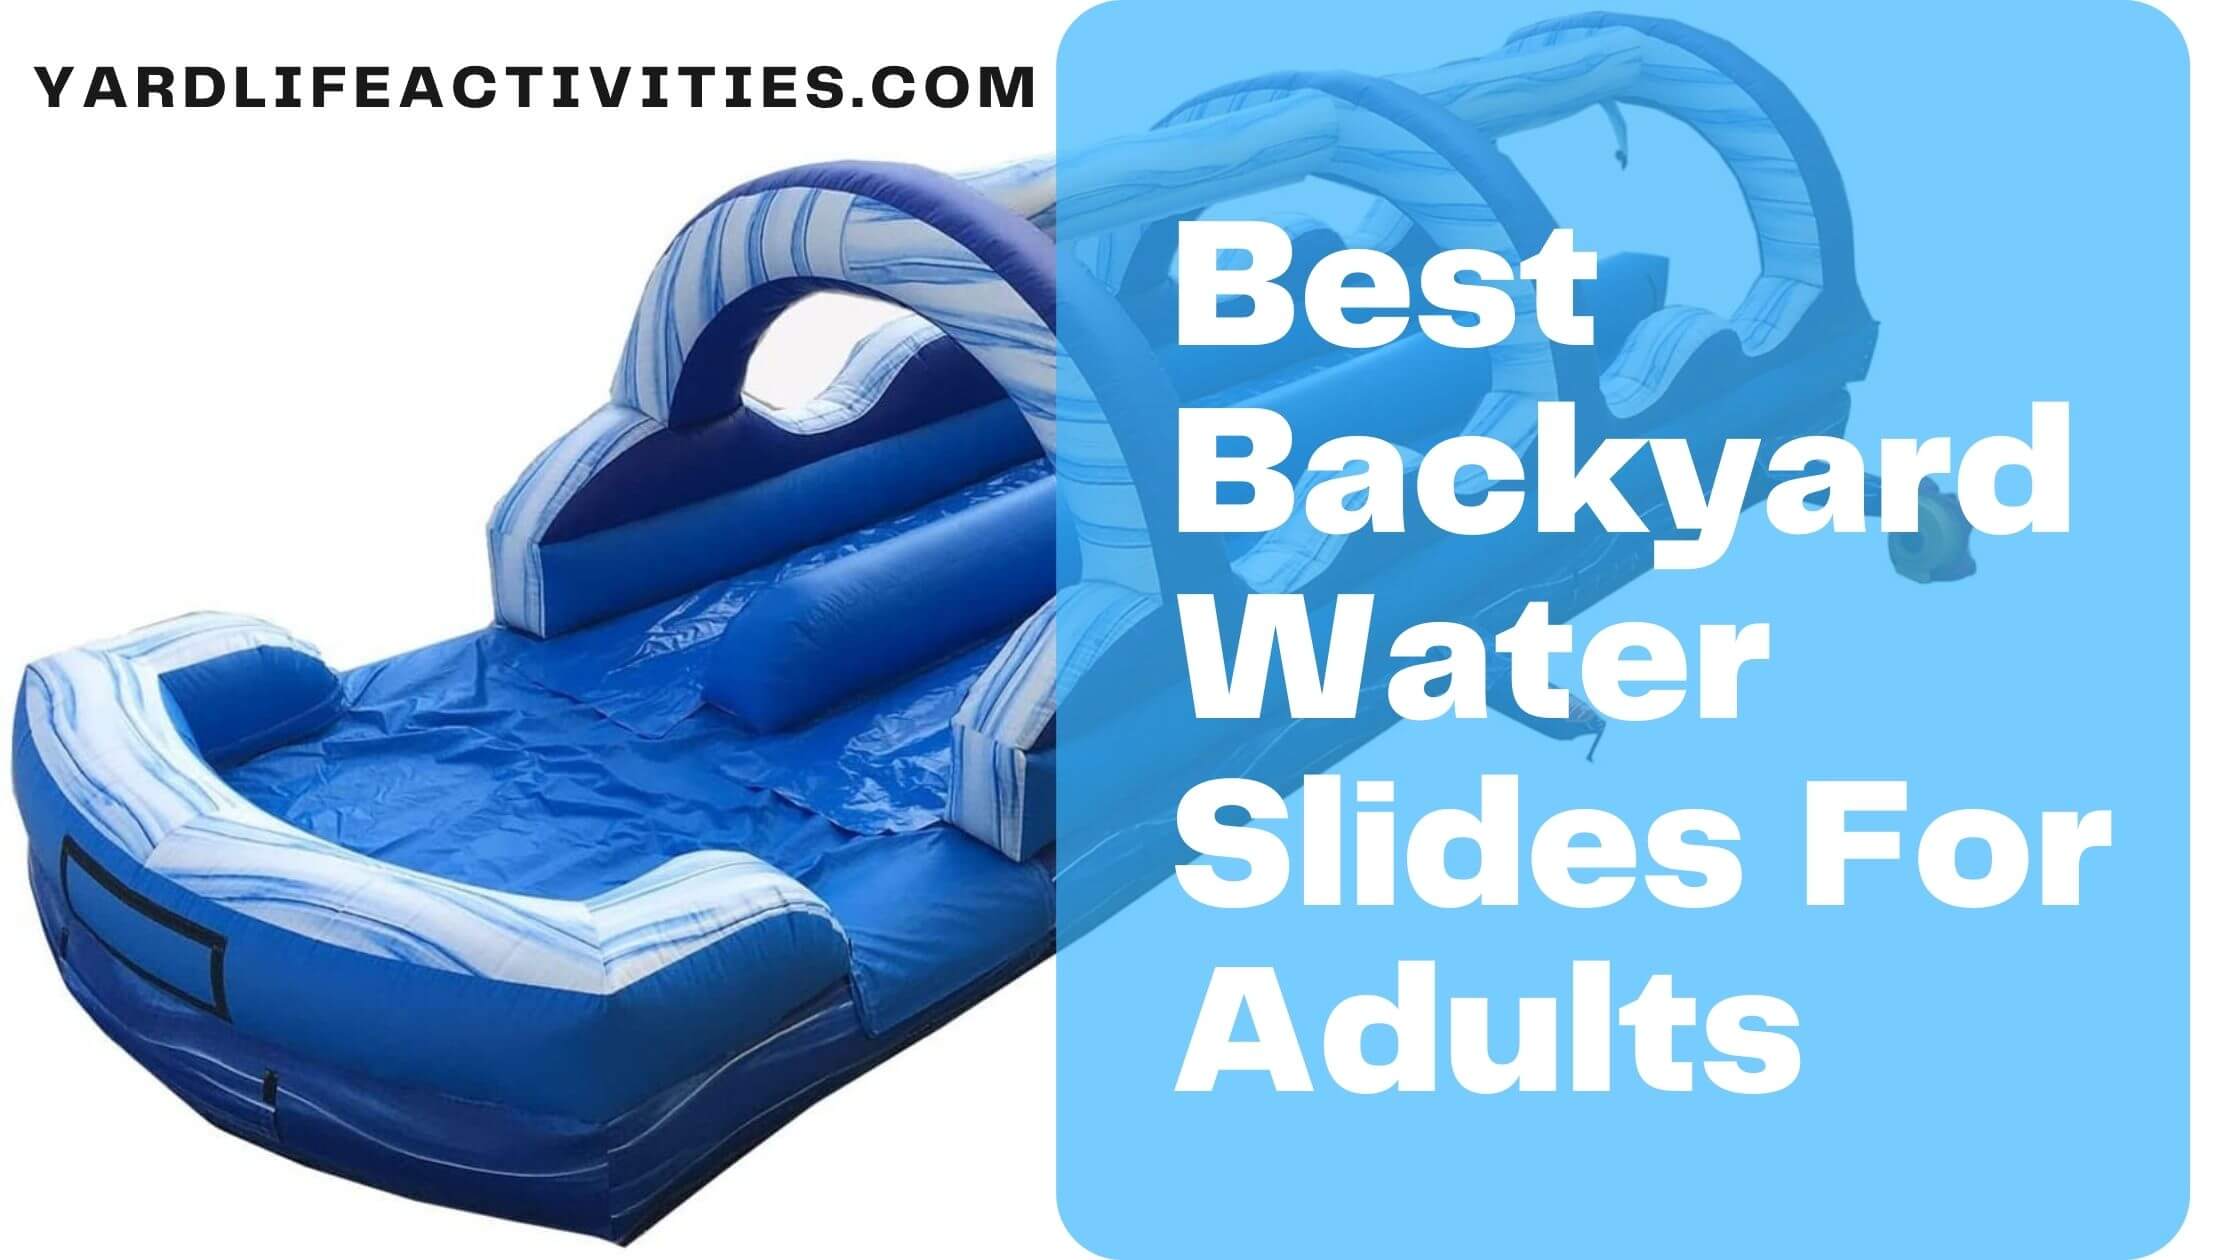 Best Backyard Water Slides For Adults